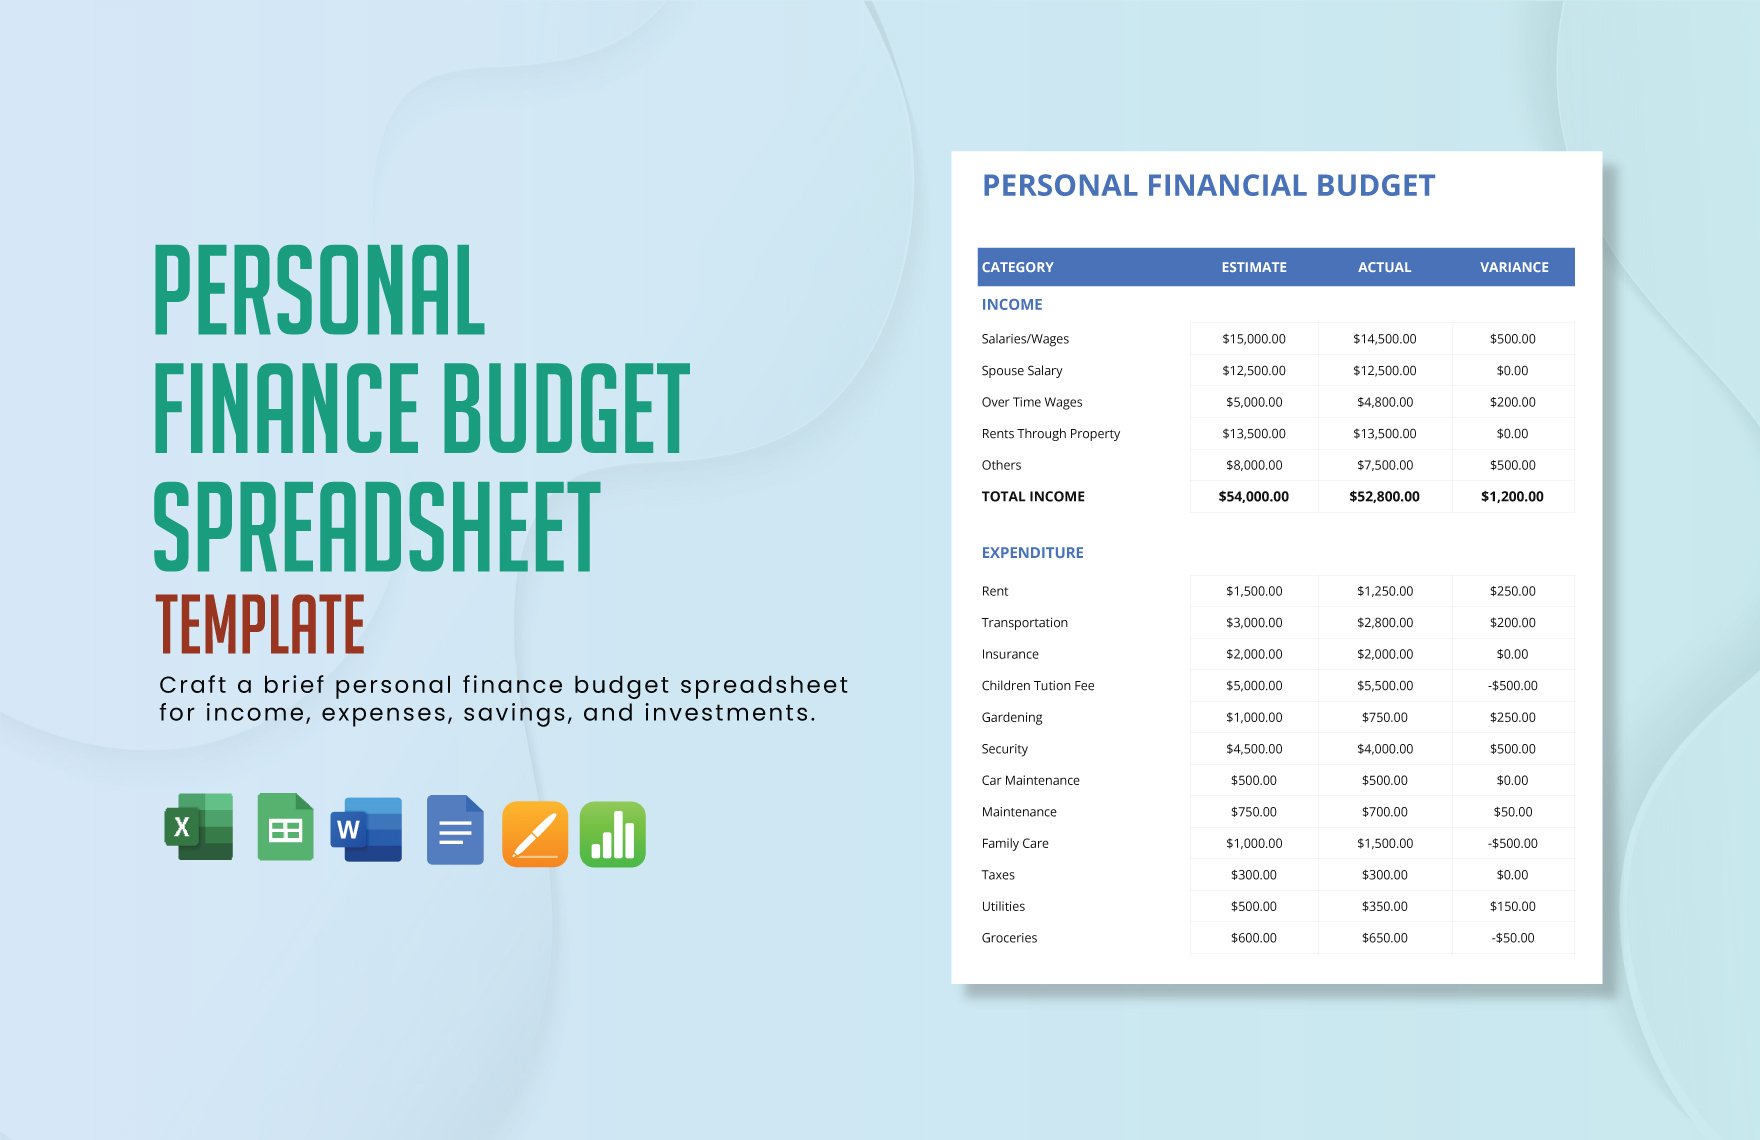 Free Personal Finance Budget Spread Sheet Template in Word, Google Docs, Excel, PDF, Google Sheets, Apple Pages